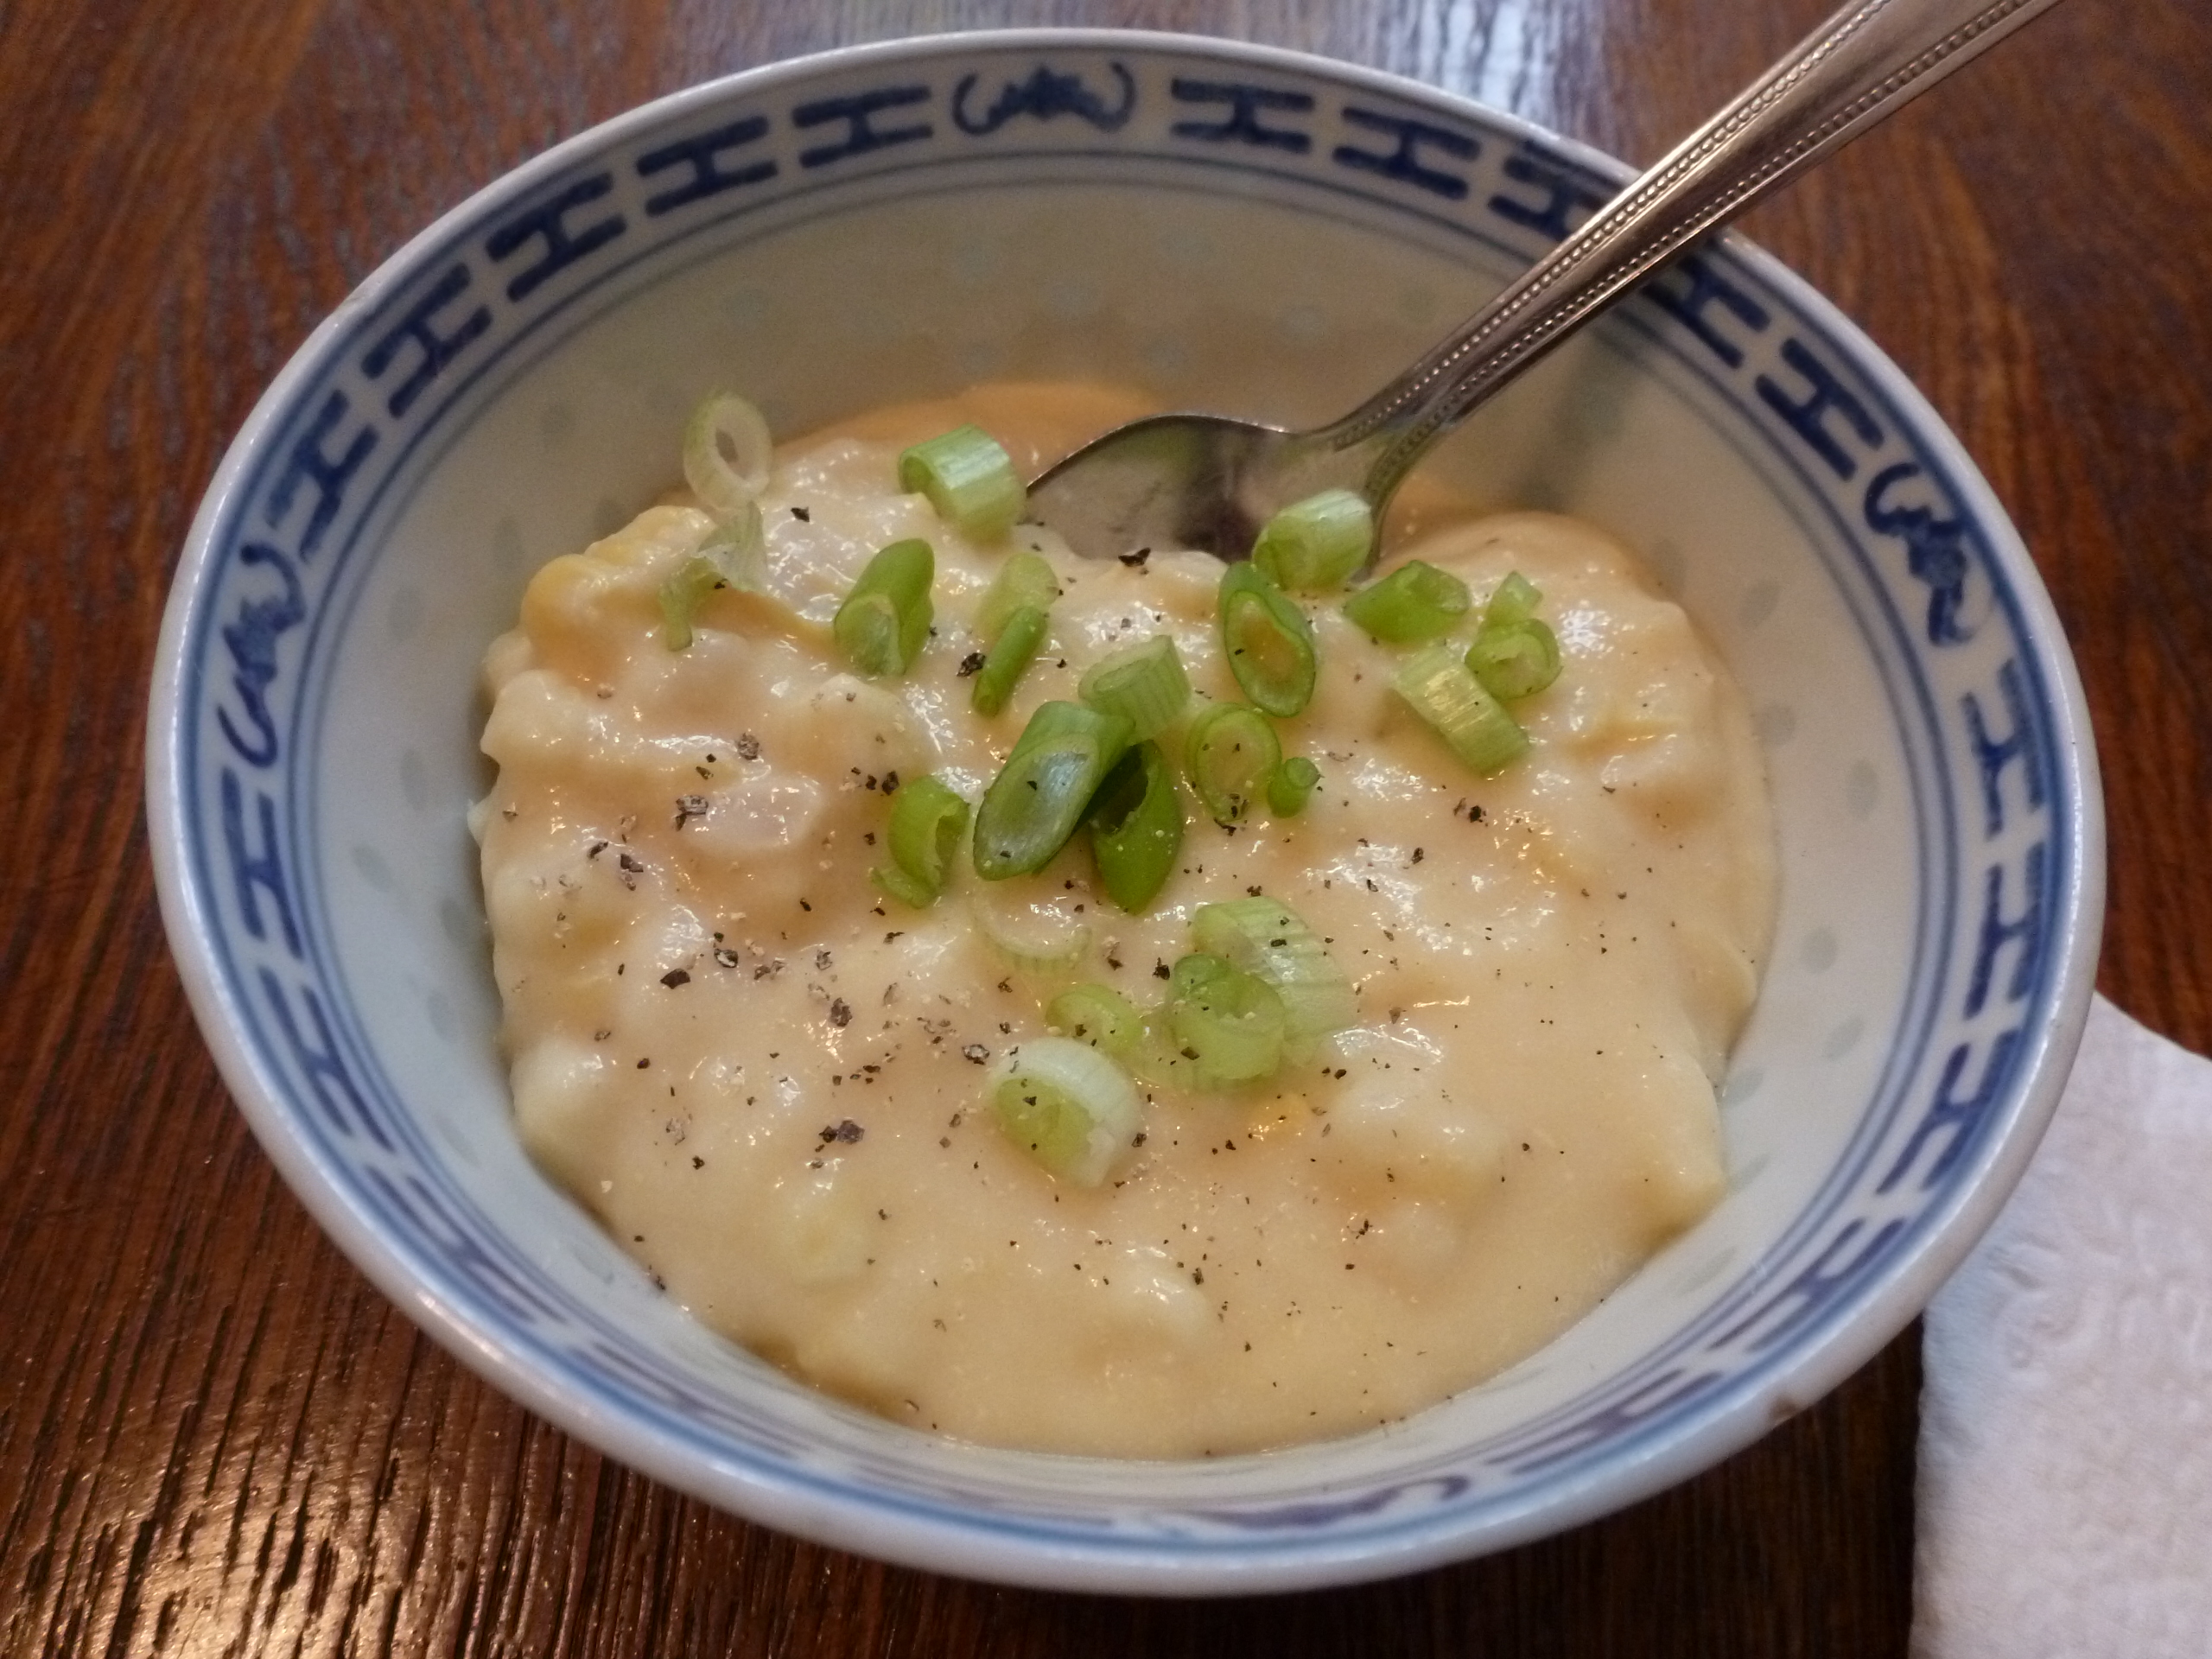 A bowl of creamed corn with green onions